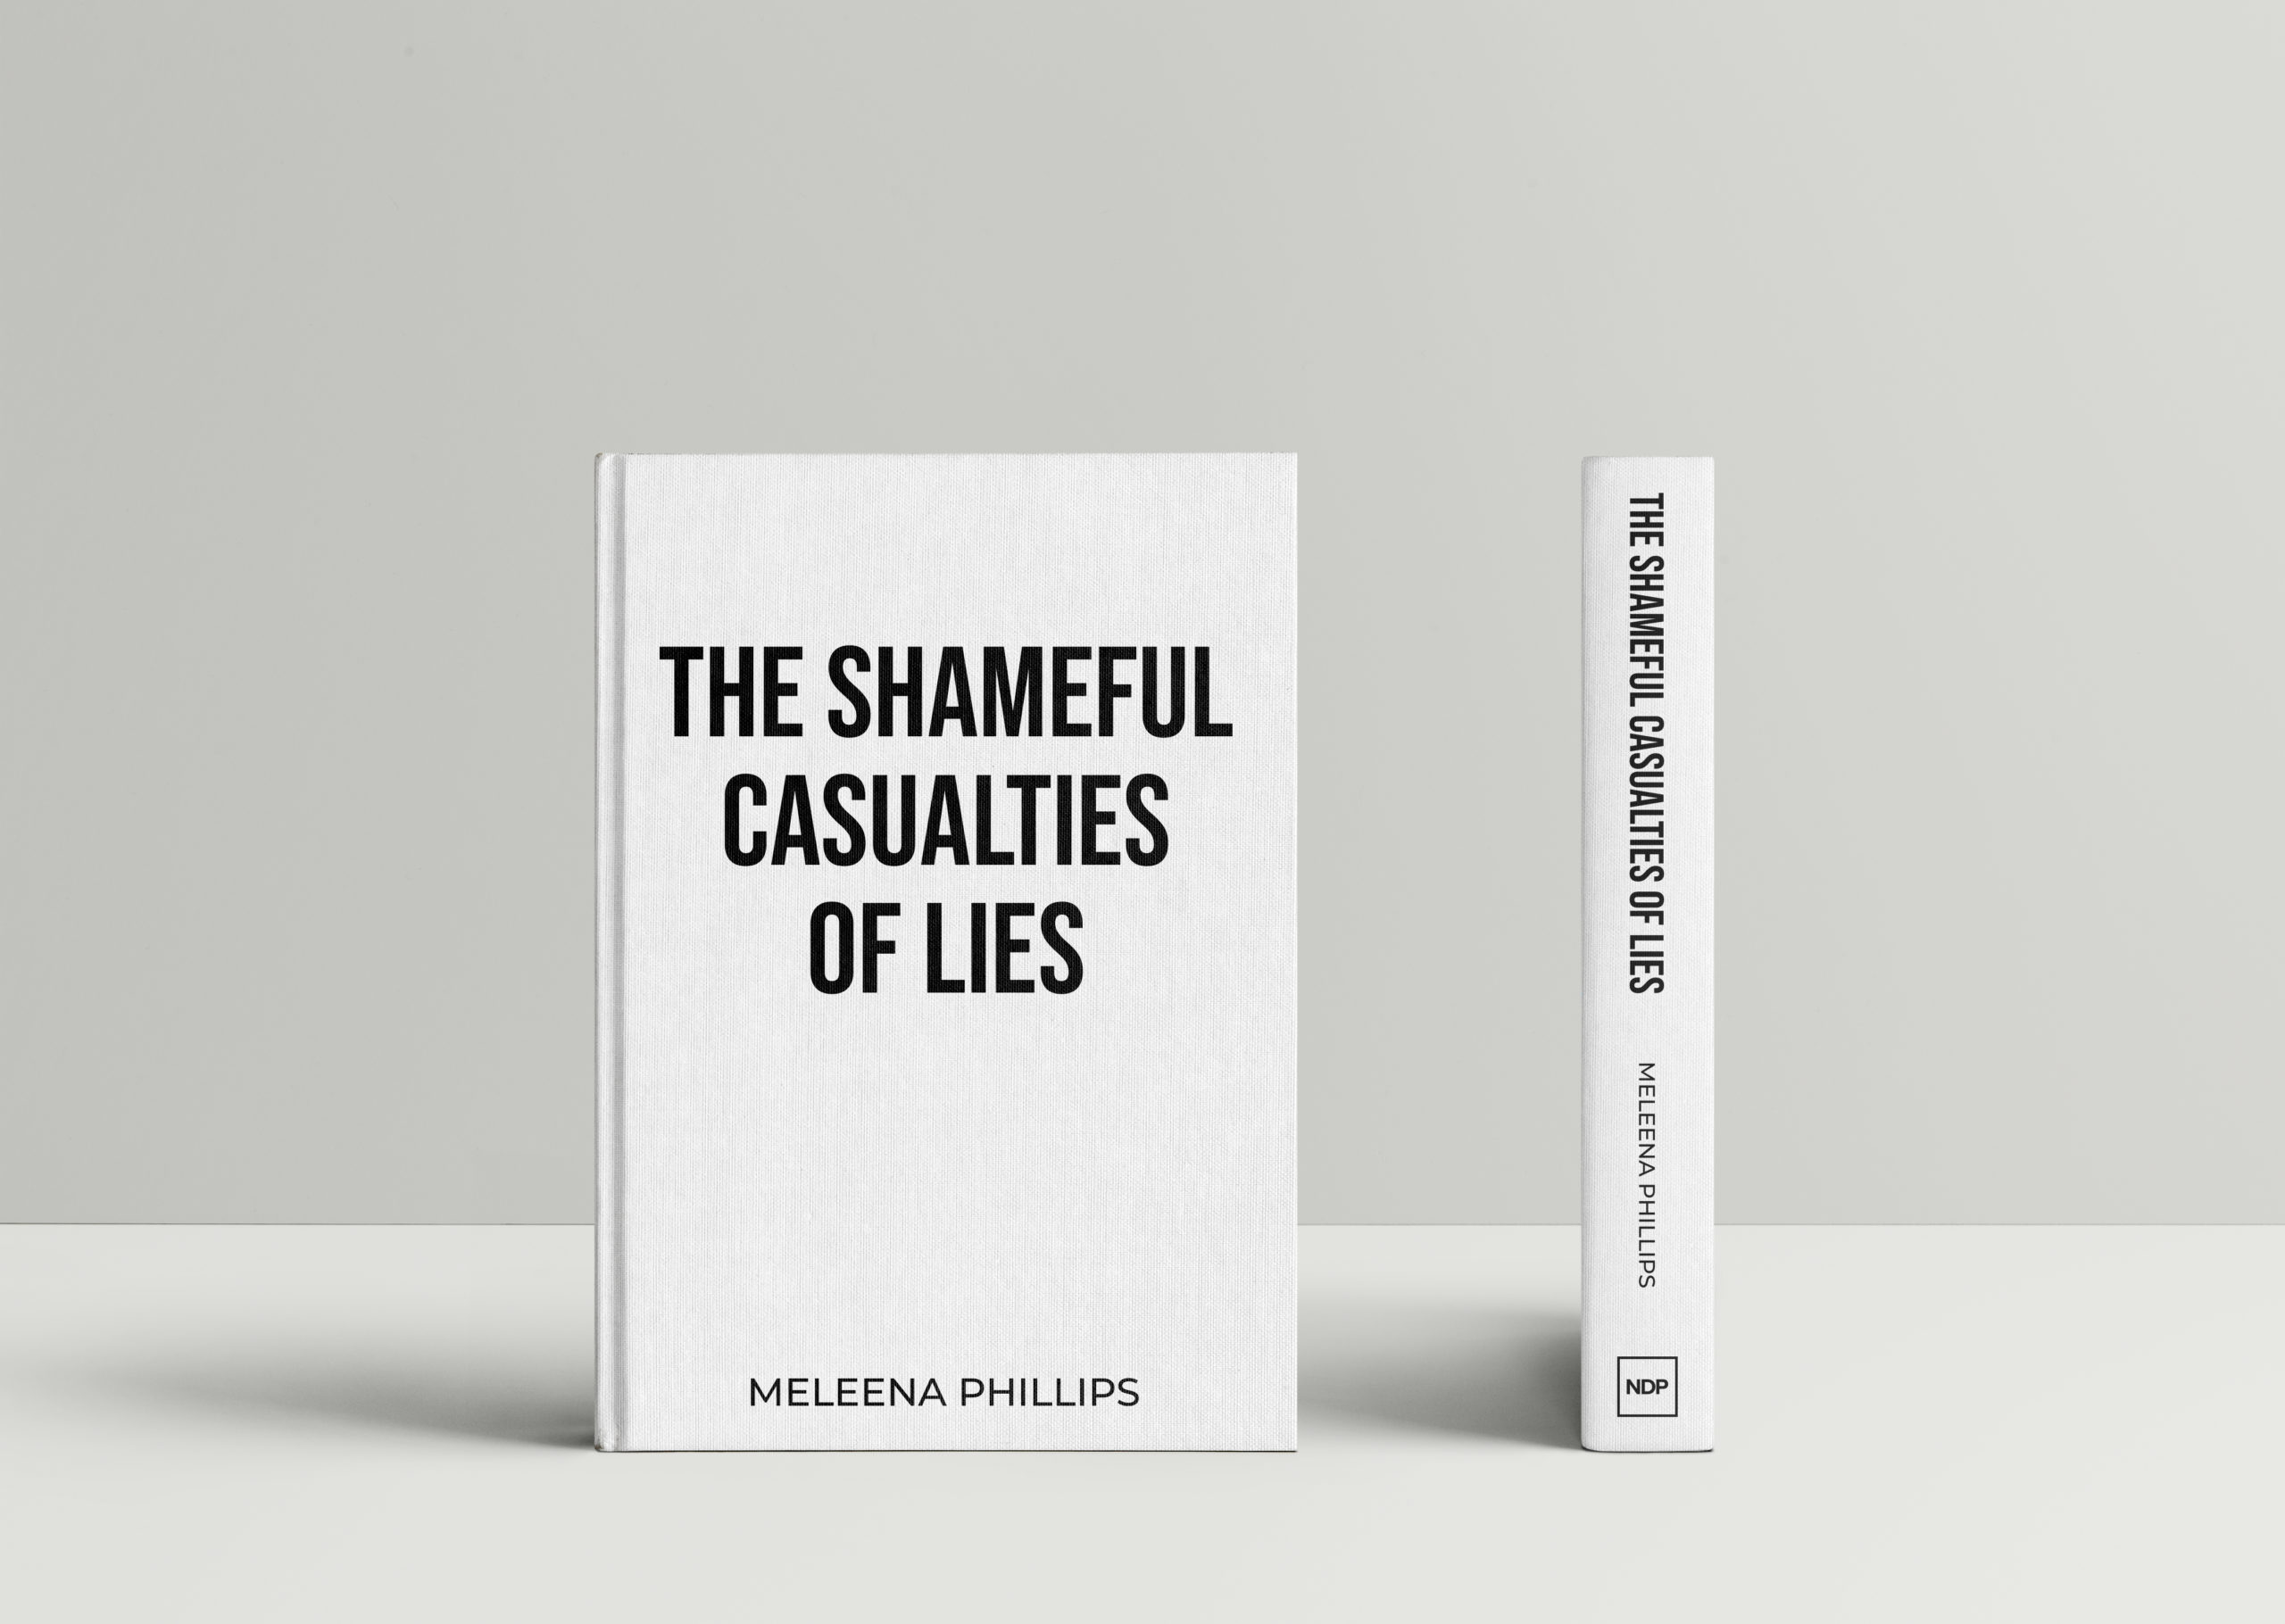 Image of Author Meleena Phillips' book The Shameful Casualties of Lies